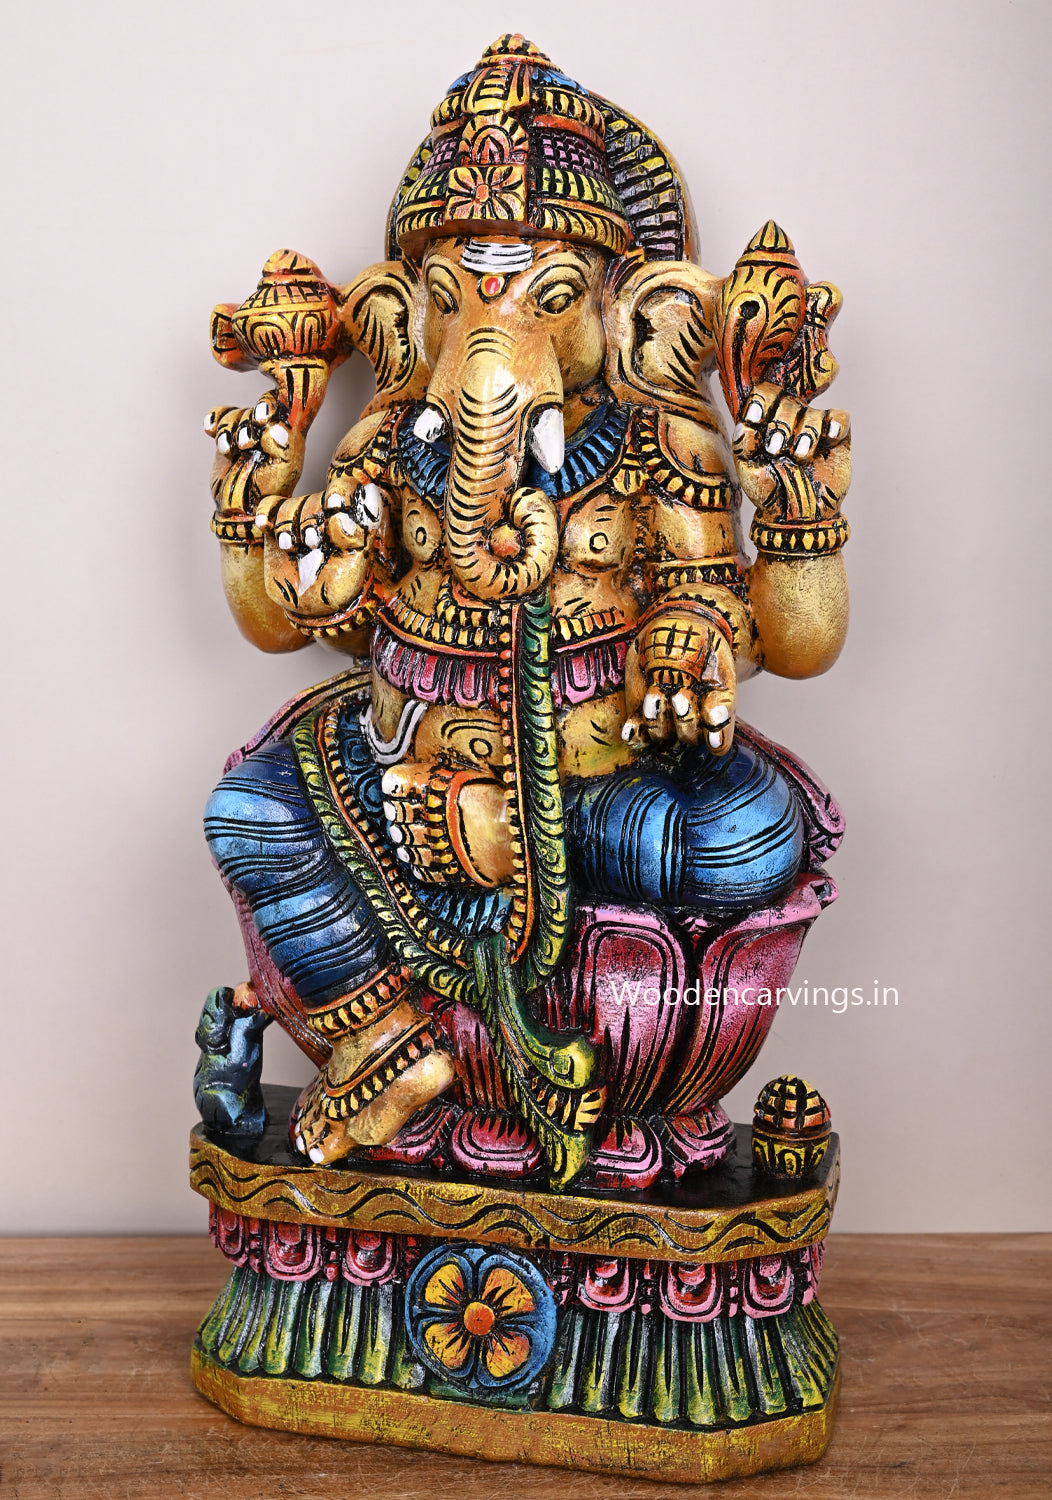 Yellowish Mangala Hara Ganapathy Ready For Decor Your Home Beautiful Coloured Wooden Sculpture 25"